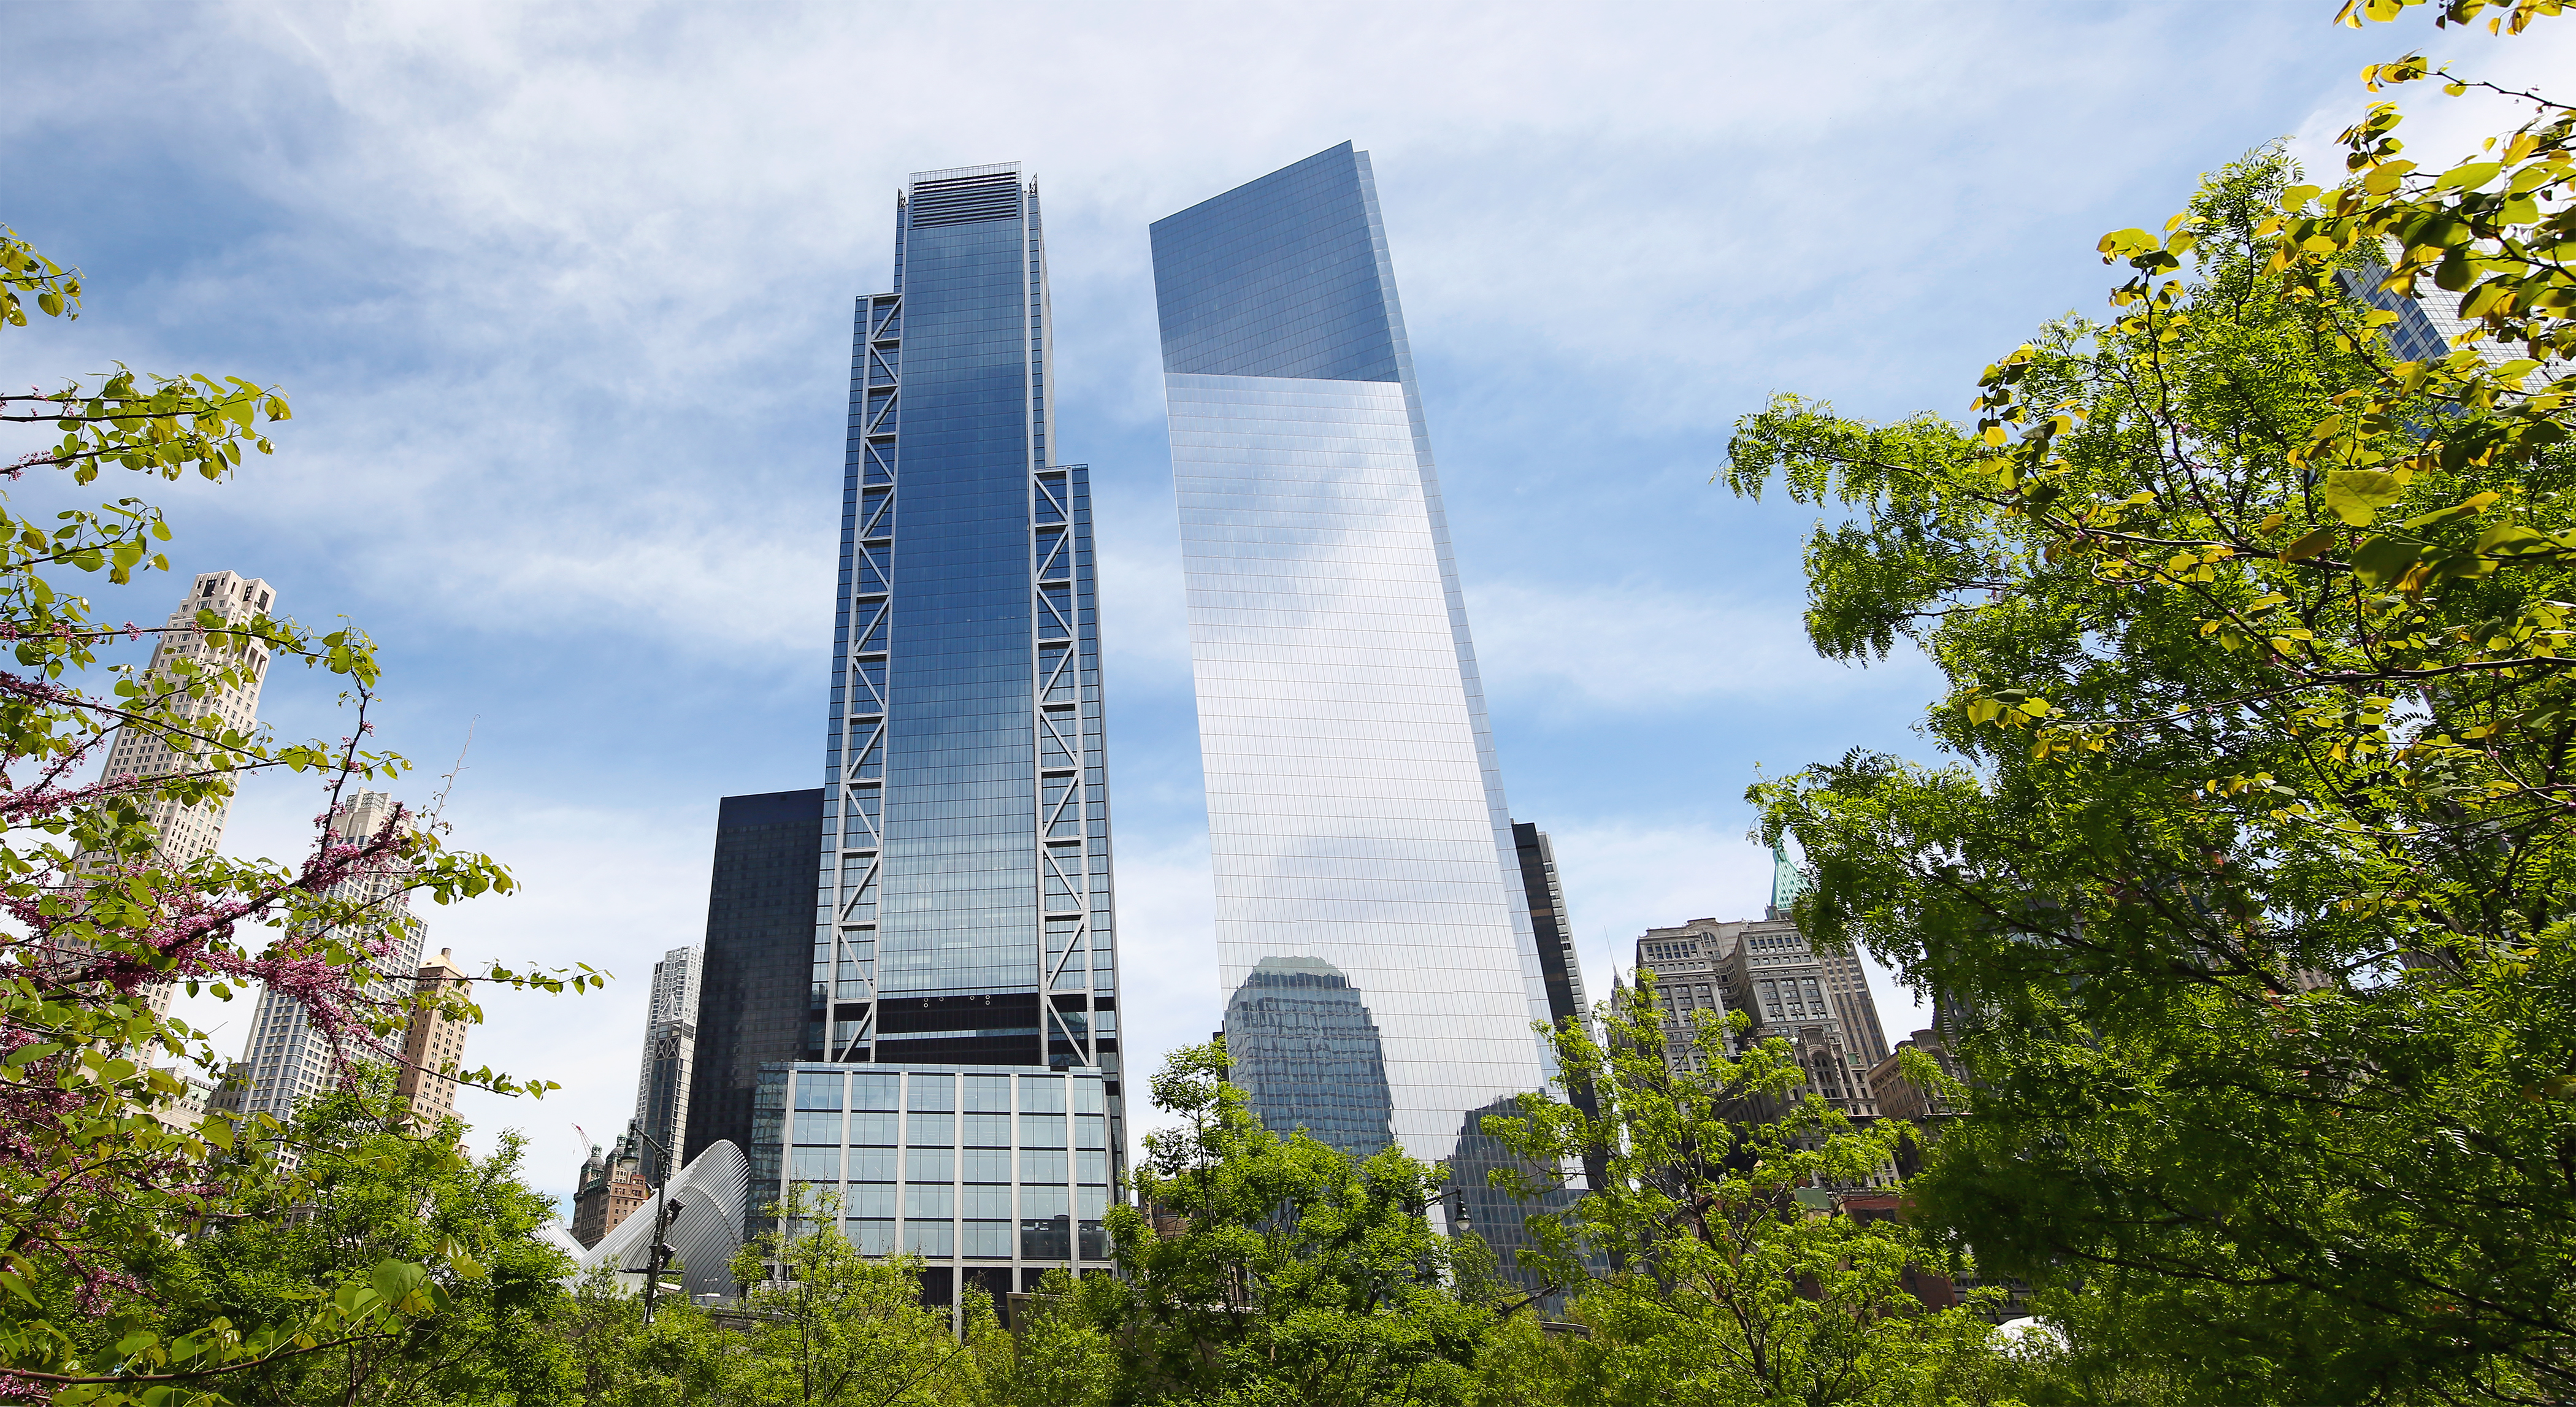 New 3 World Trade Center to mark another step in NYC's downtown revival